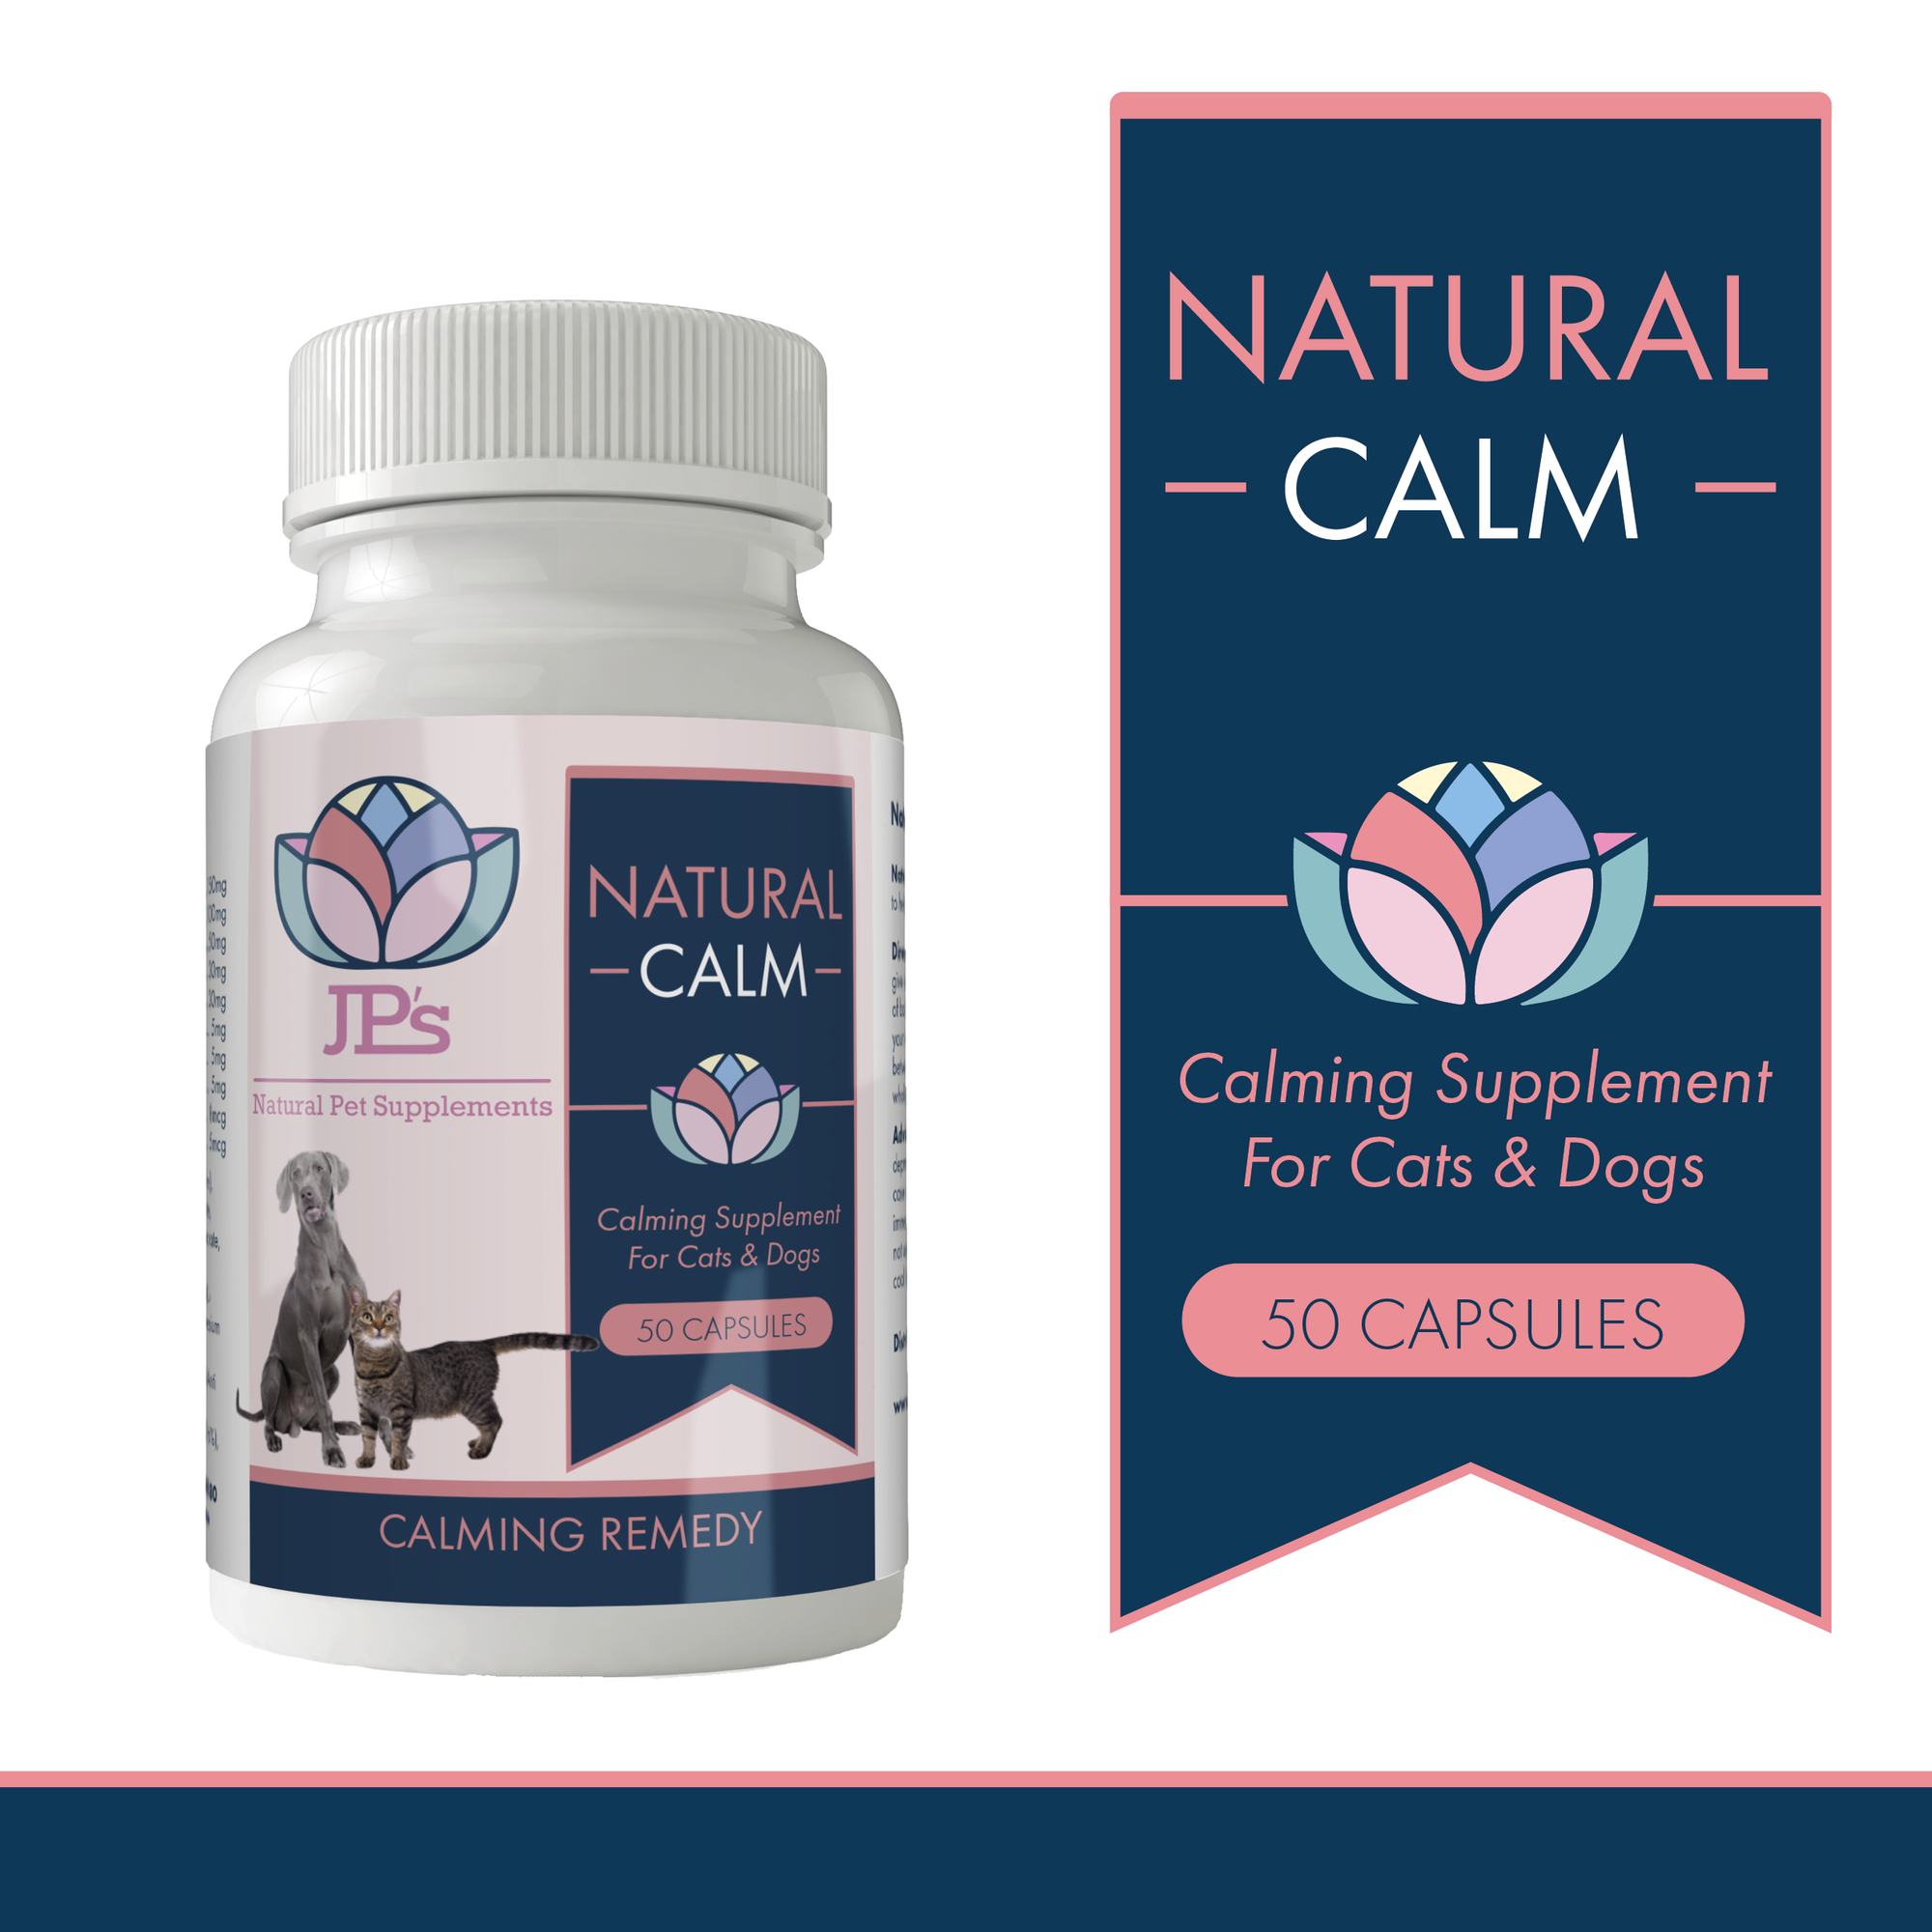 Natural calming supplement for cats & dogs